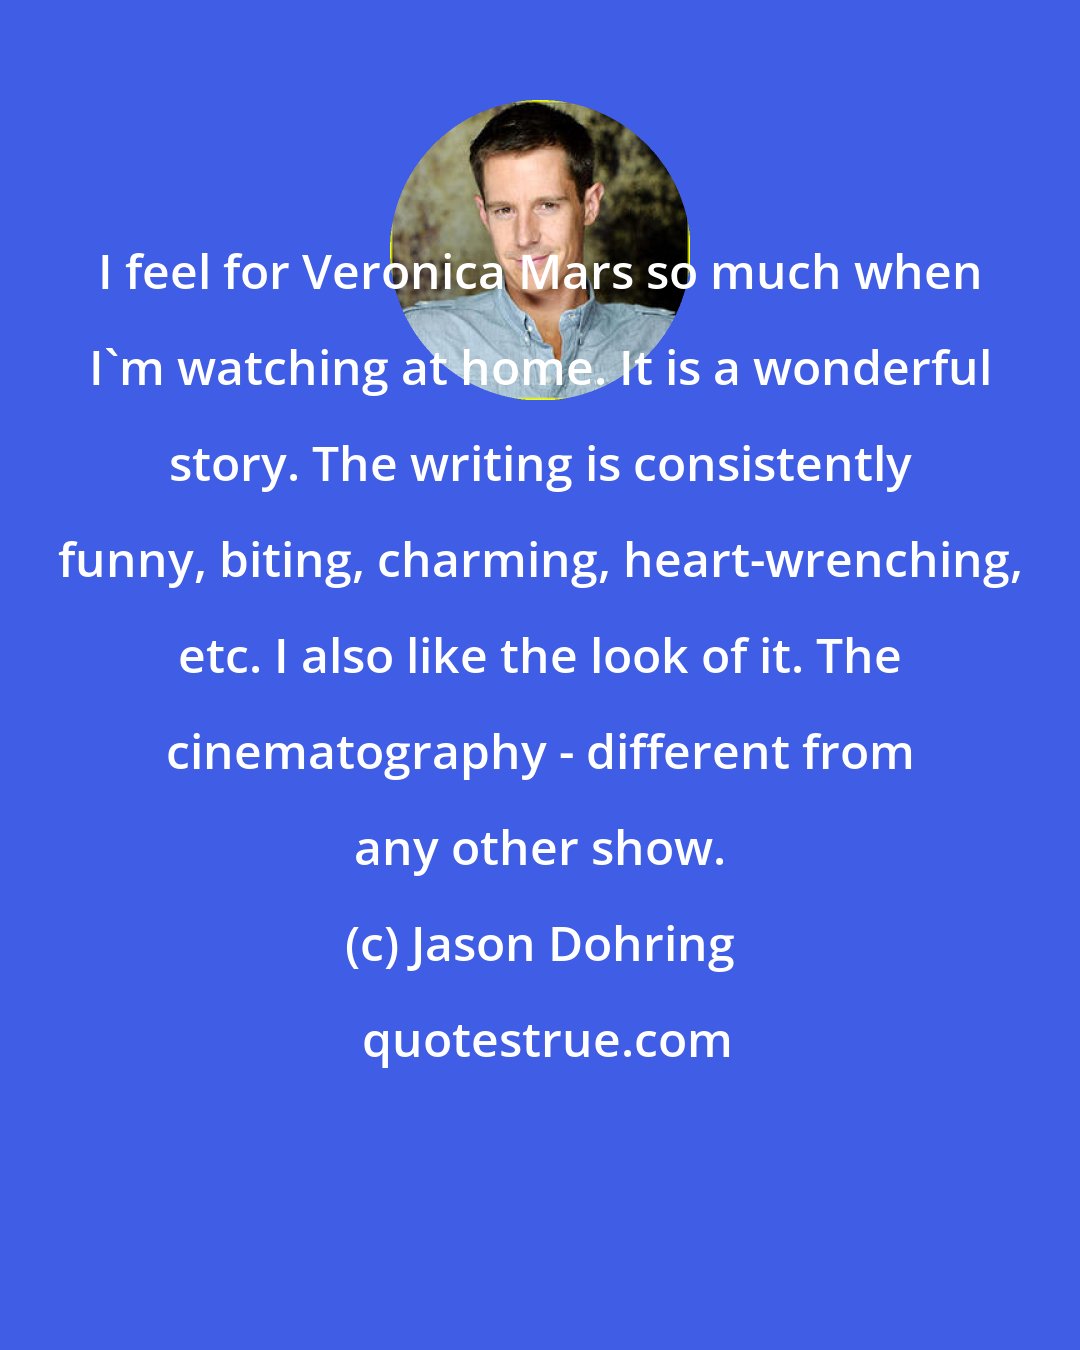 Jason Dohring: I feel for Veronica Mars so much when I'm watching at home. It is a wonderful story. The writing is consistently funny, biting, charming, heart-wrenching, etc. I also like the look of it. The cinematography - different from any other show.